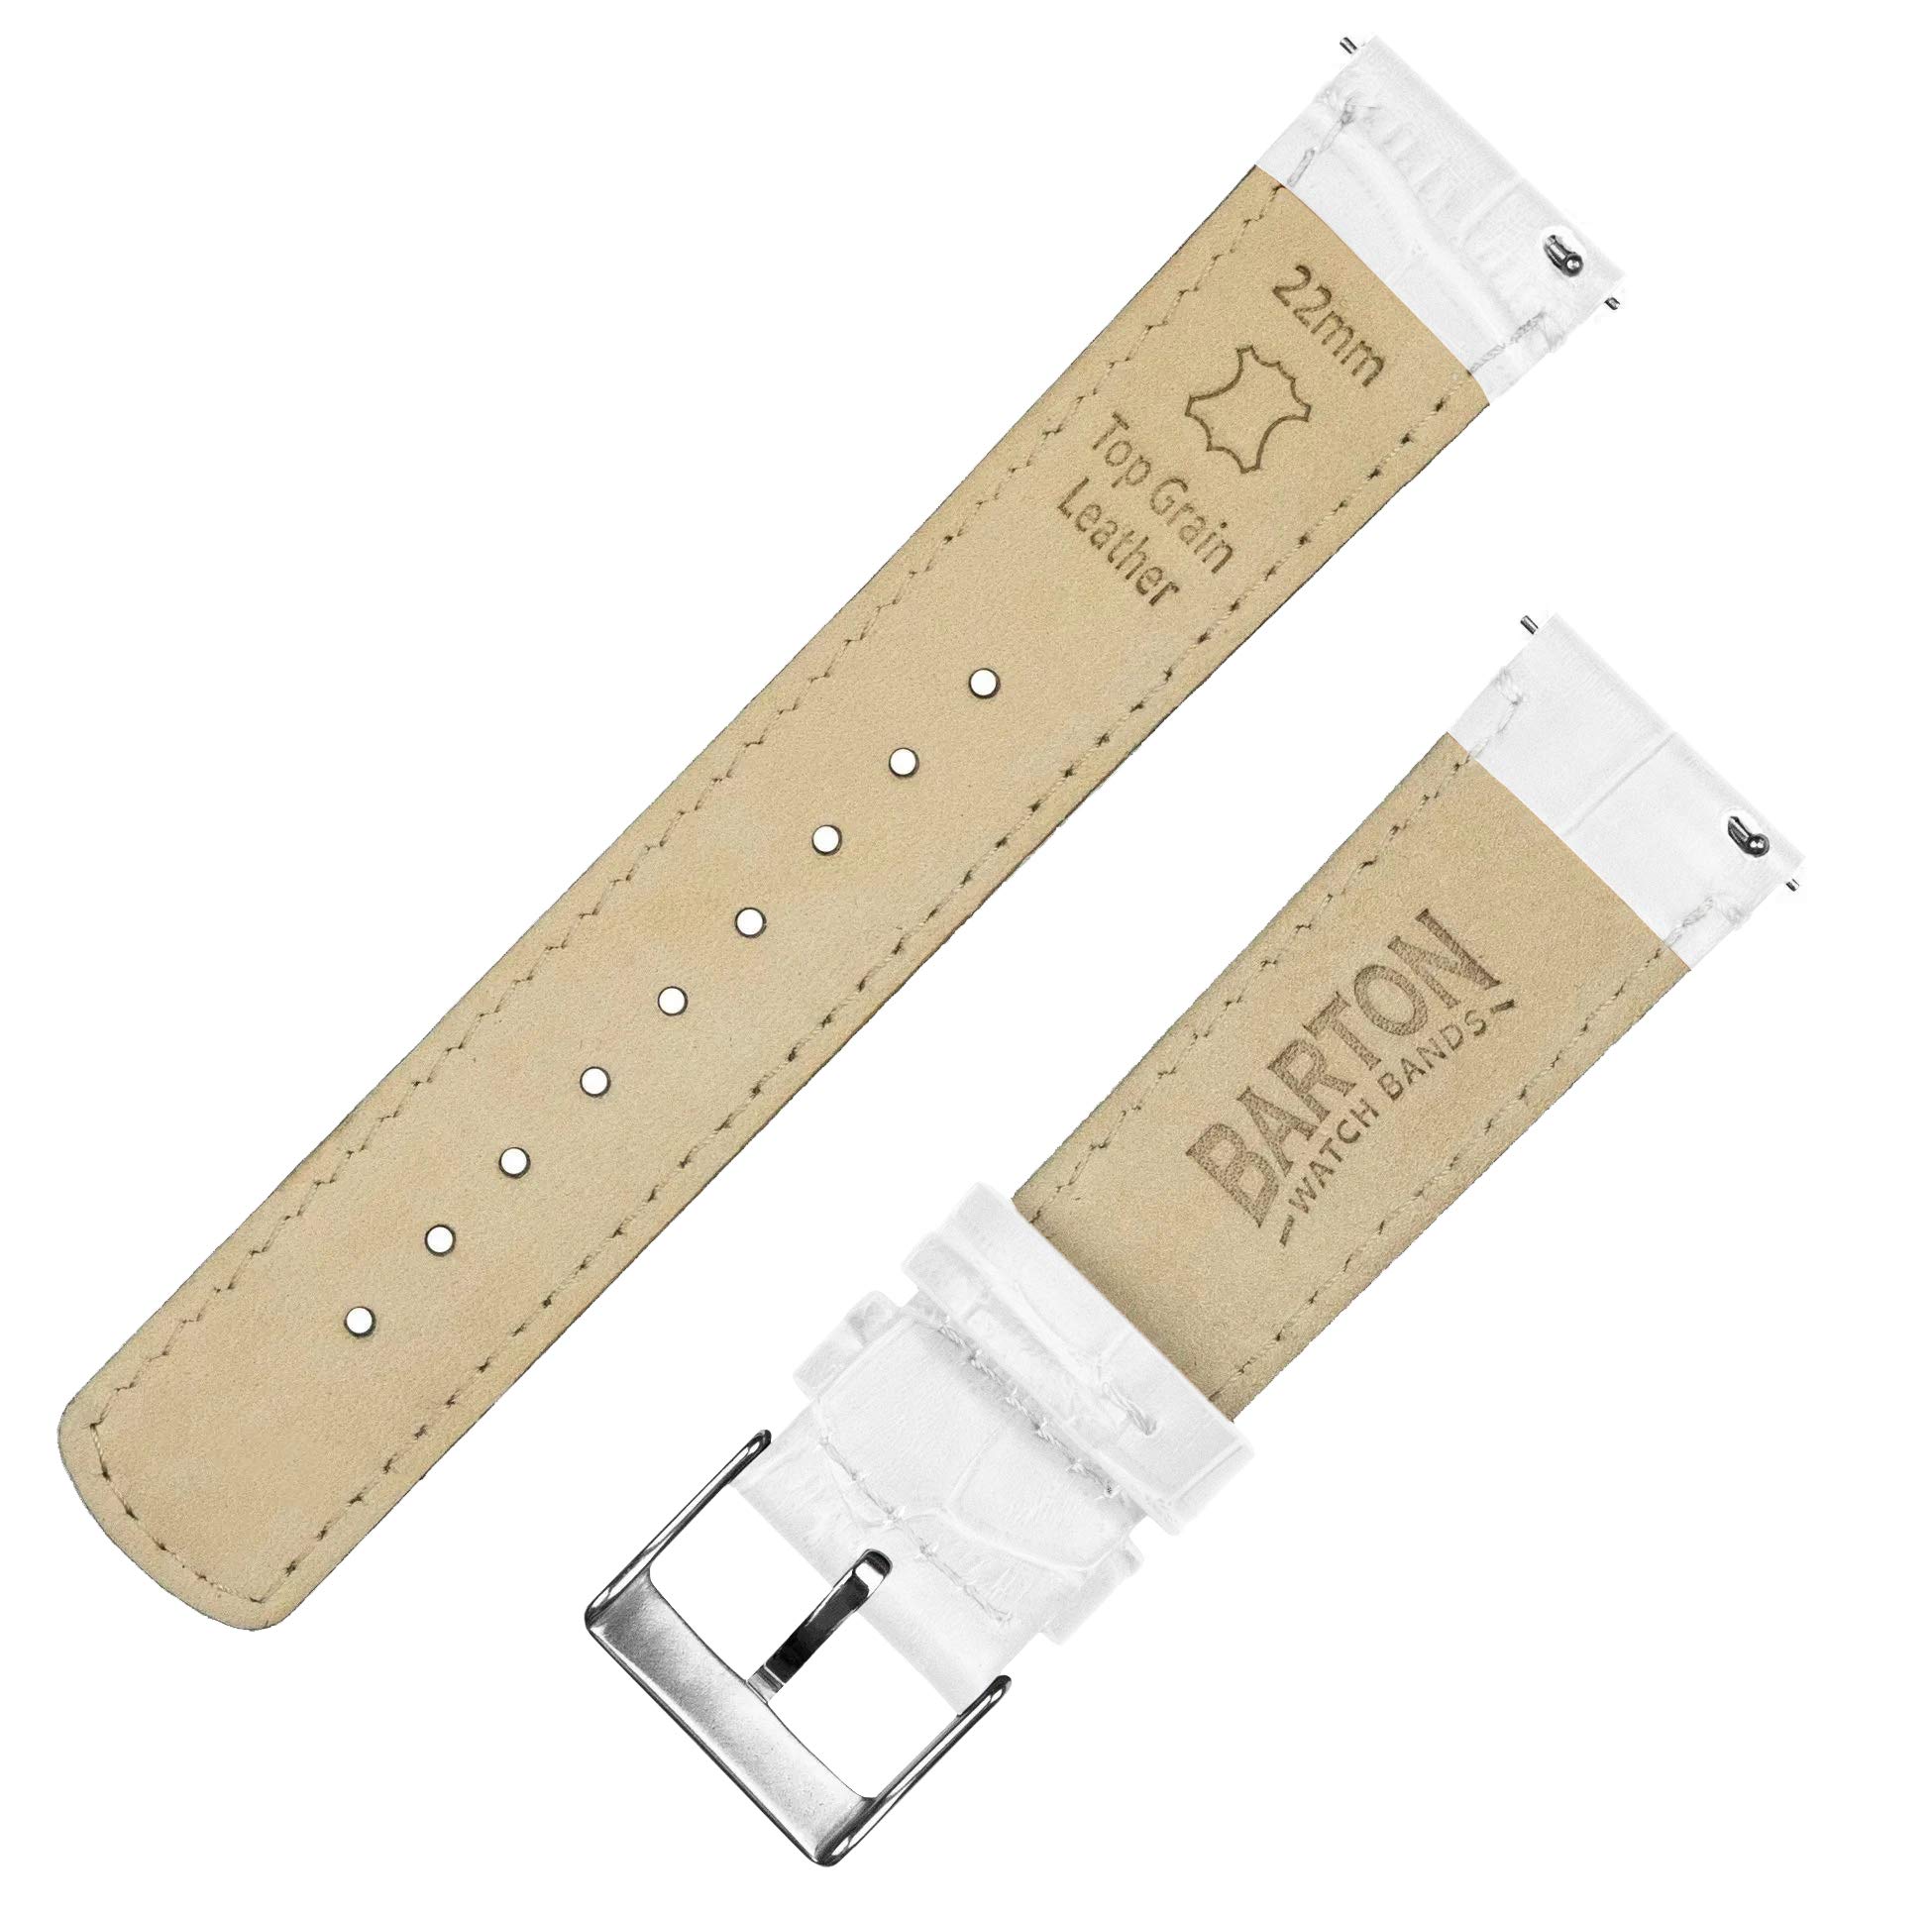 Barton Alligator Grain - Quick Release Leather Watch Bands - Choose Color, Length & Width - 16mm, 18mm, 19mm, 20mm, 21mm, 22mm, 23mm, or 24mm Standard or Long